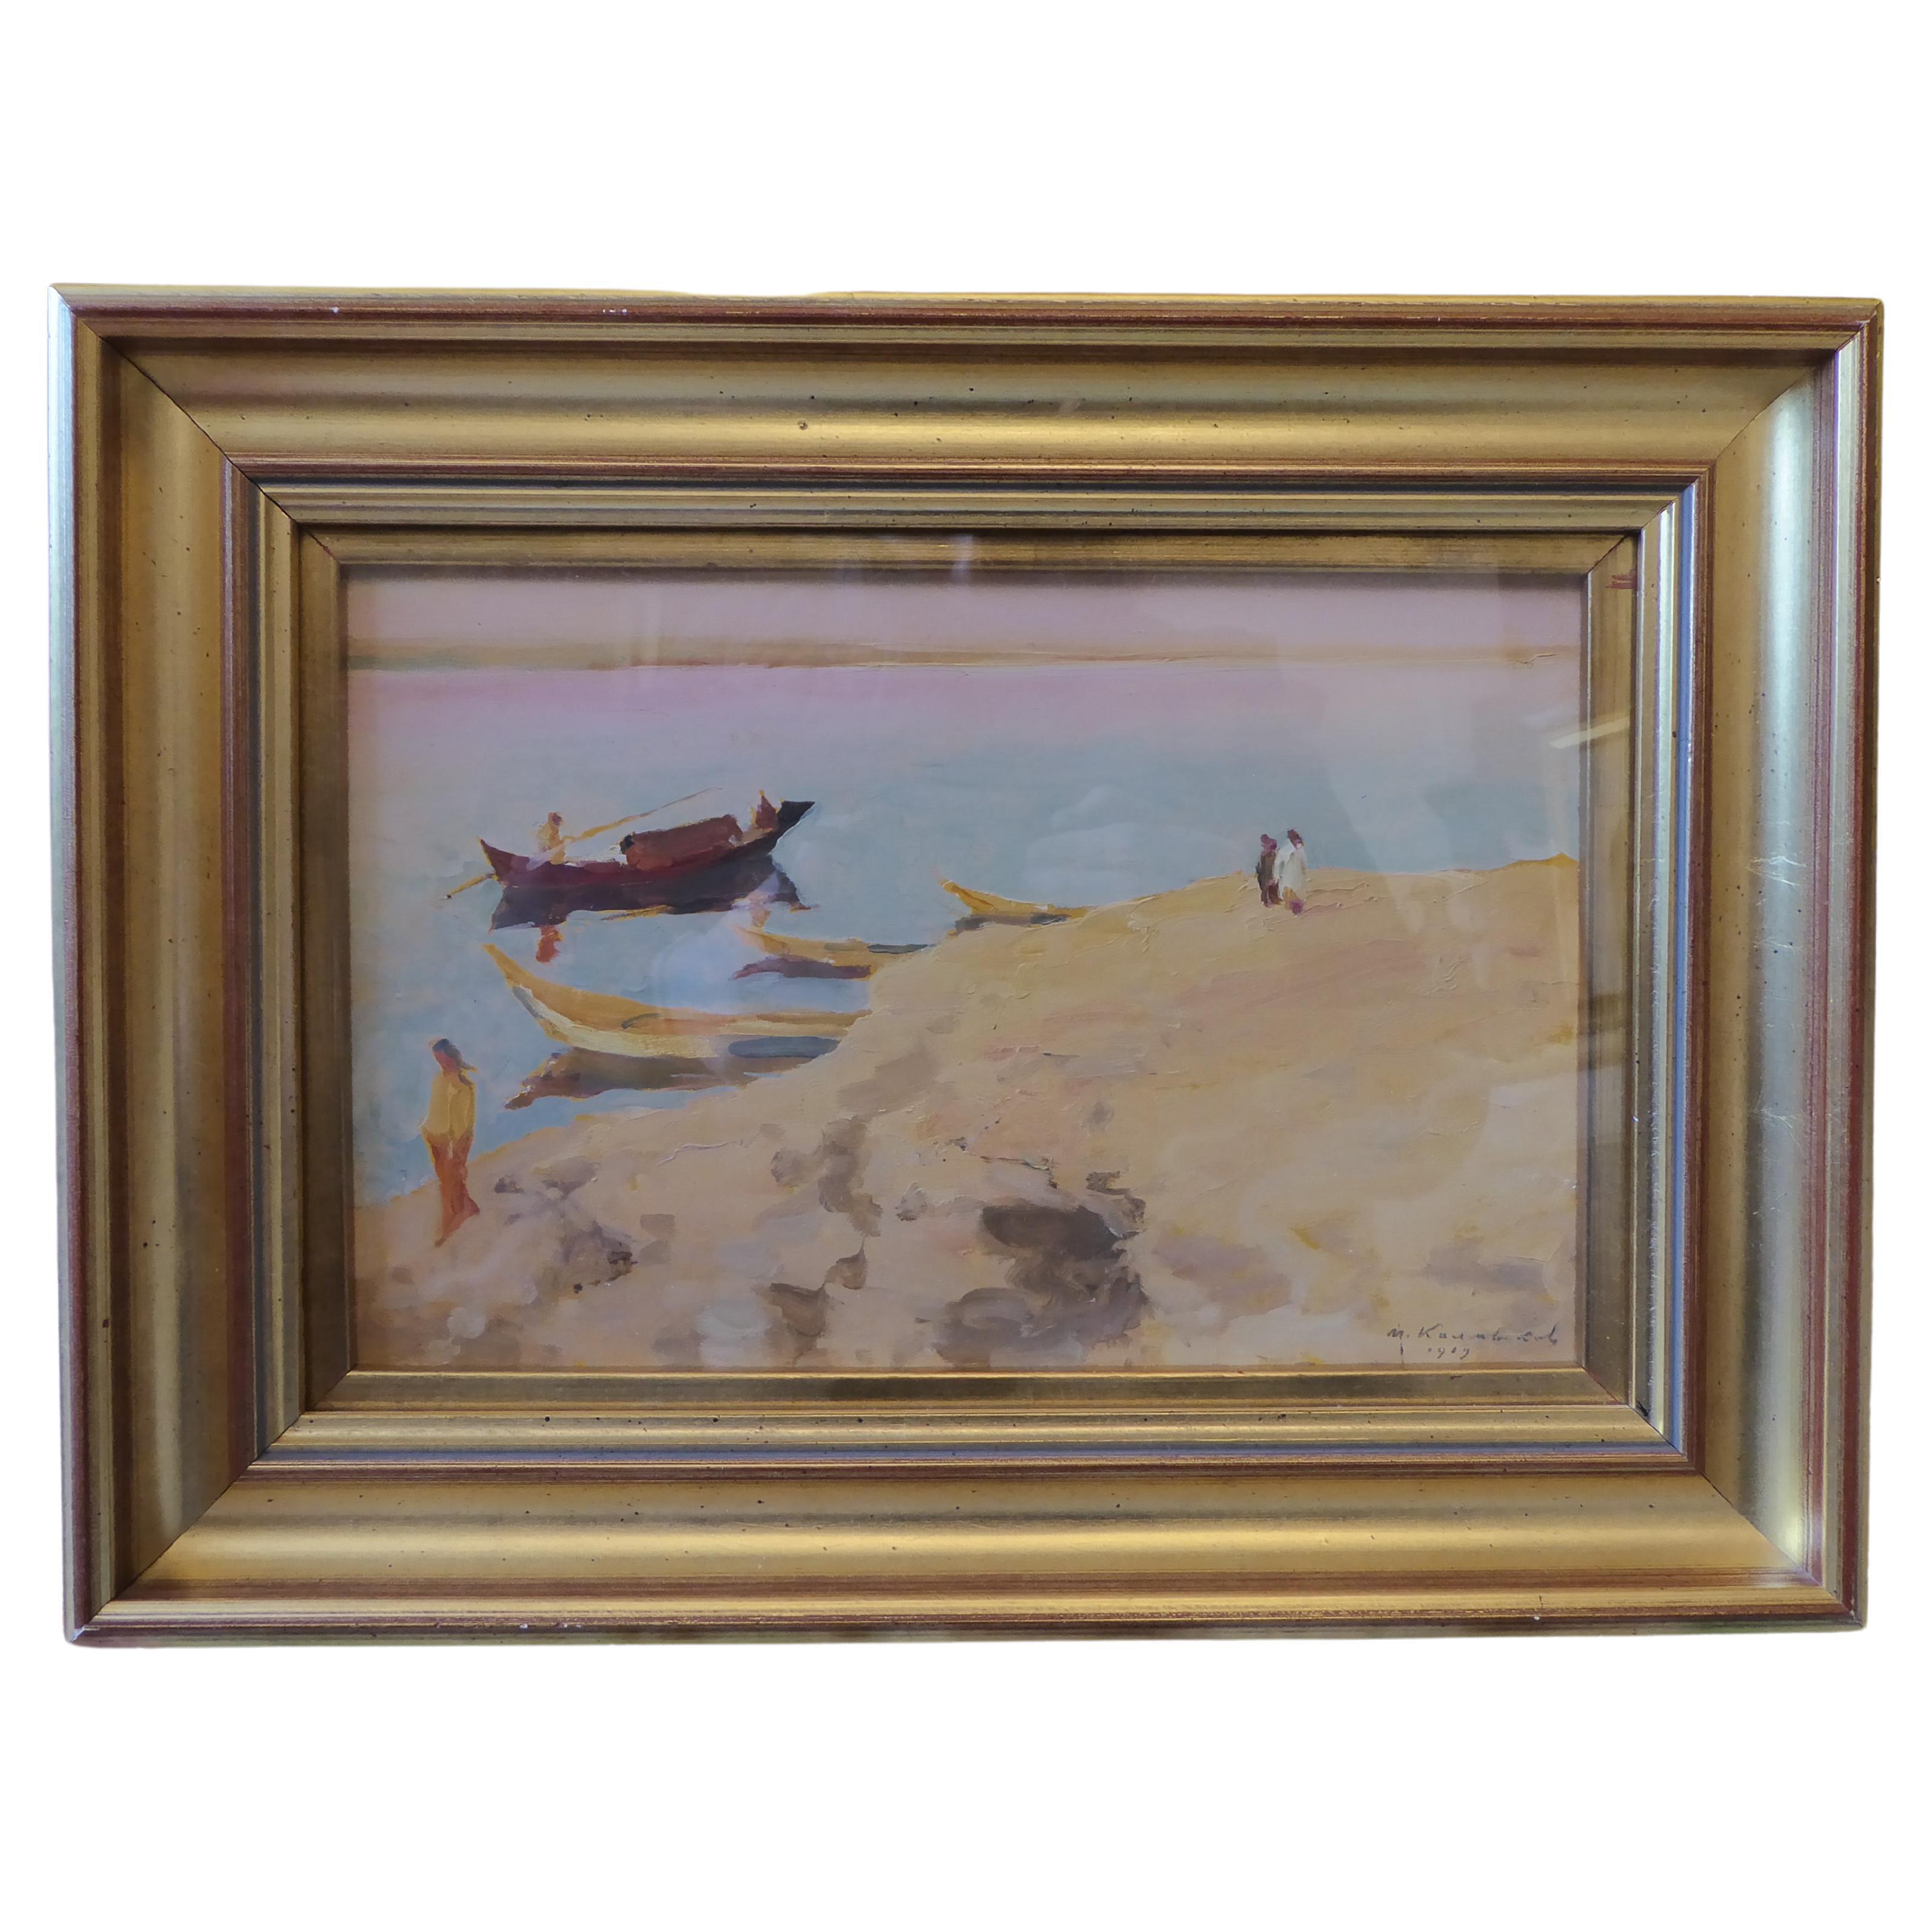 Midle eastern picture , Delightful subject matter  with craft off shore with oar For Sale